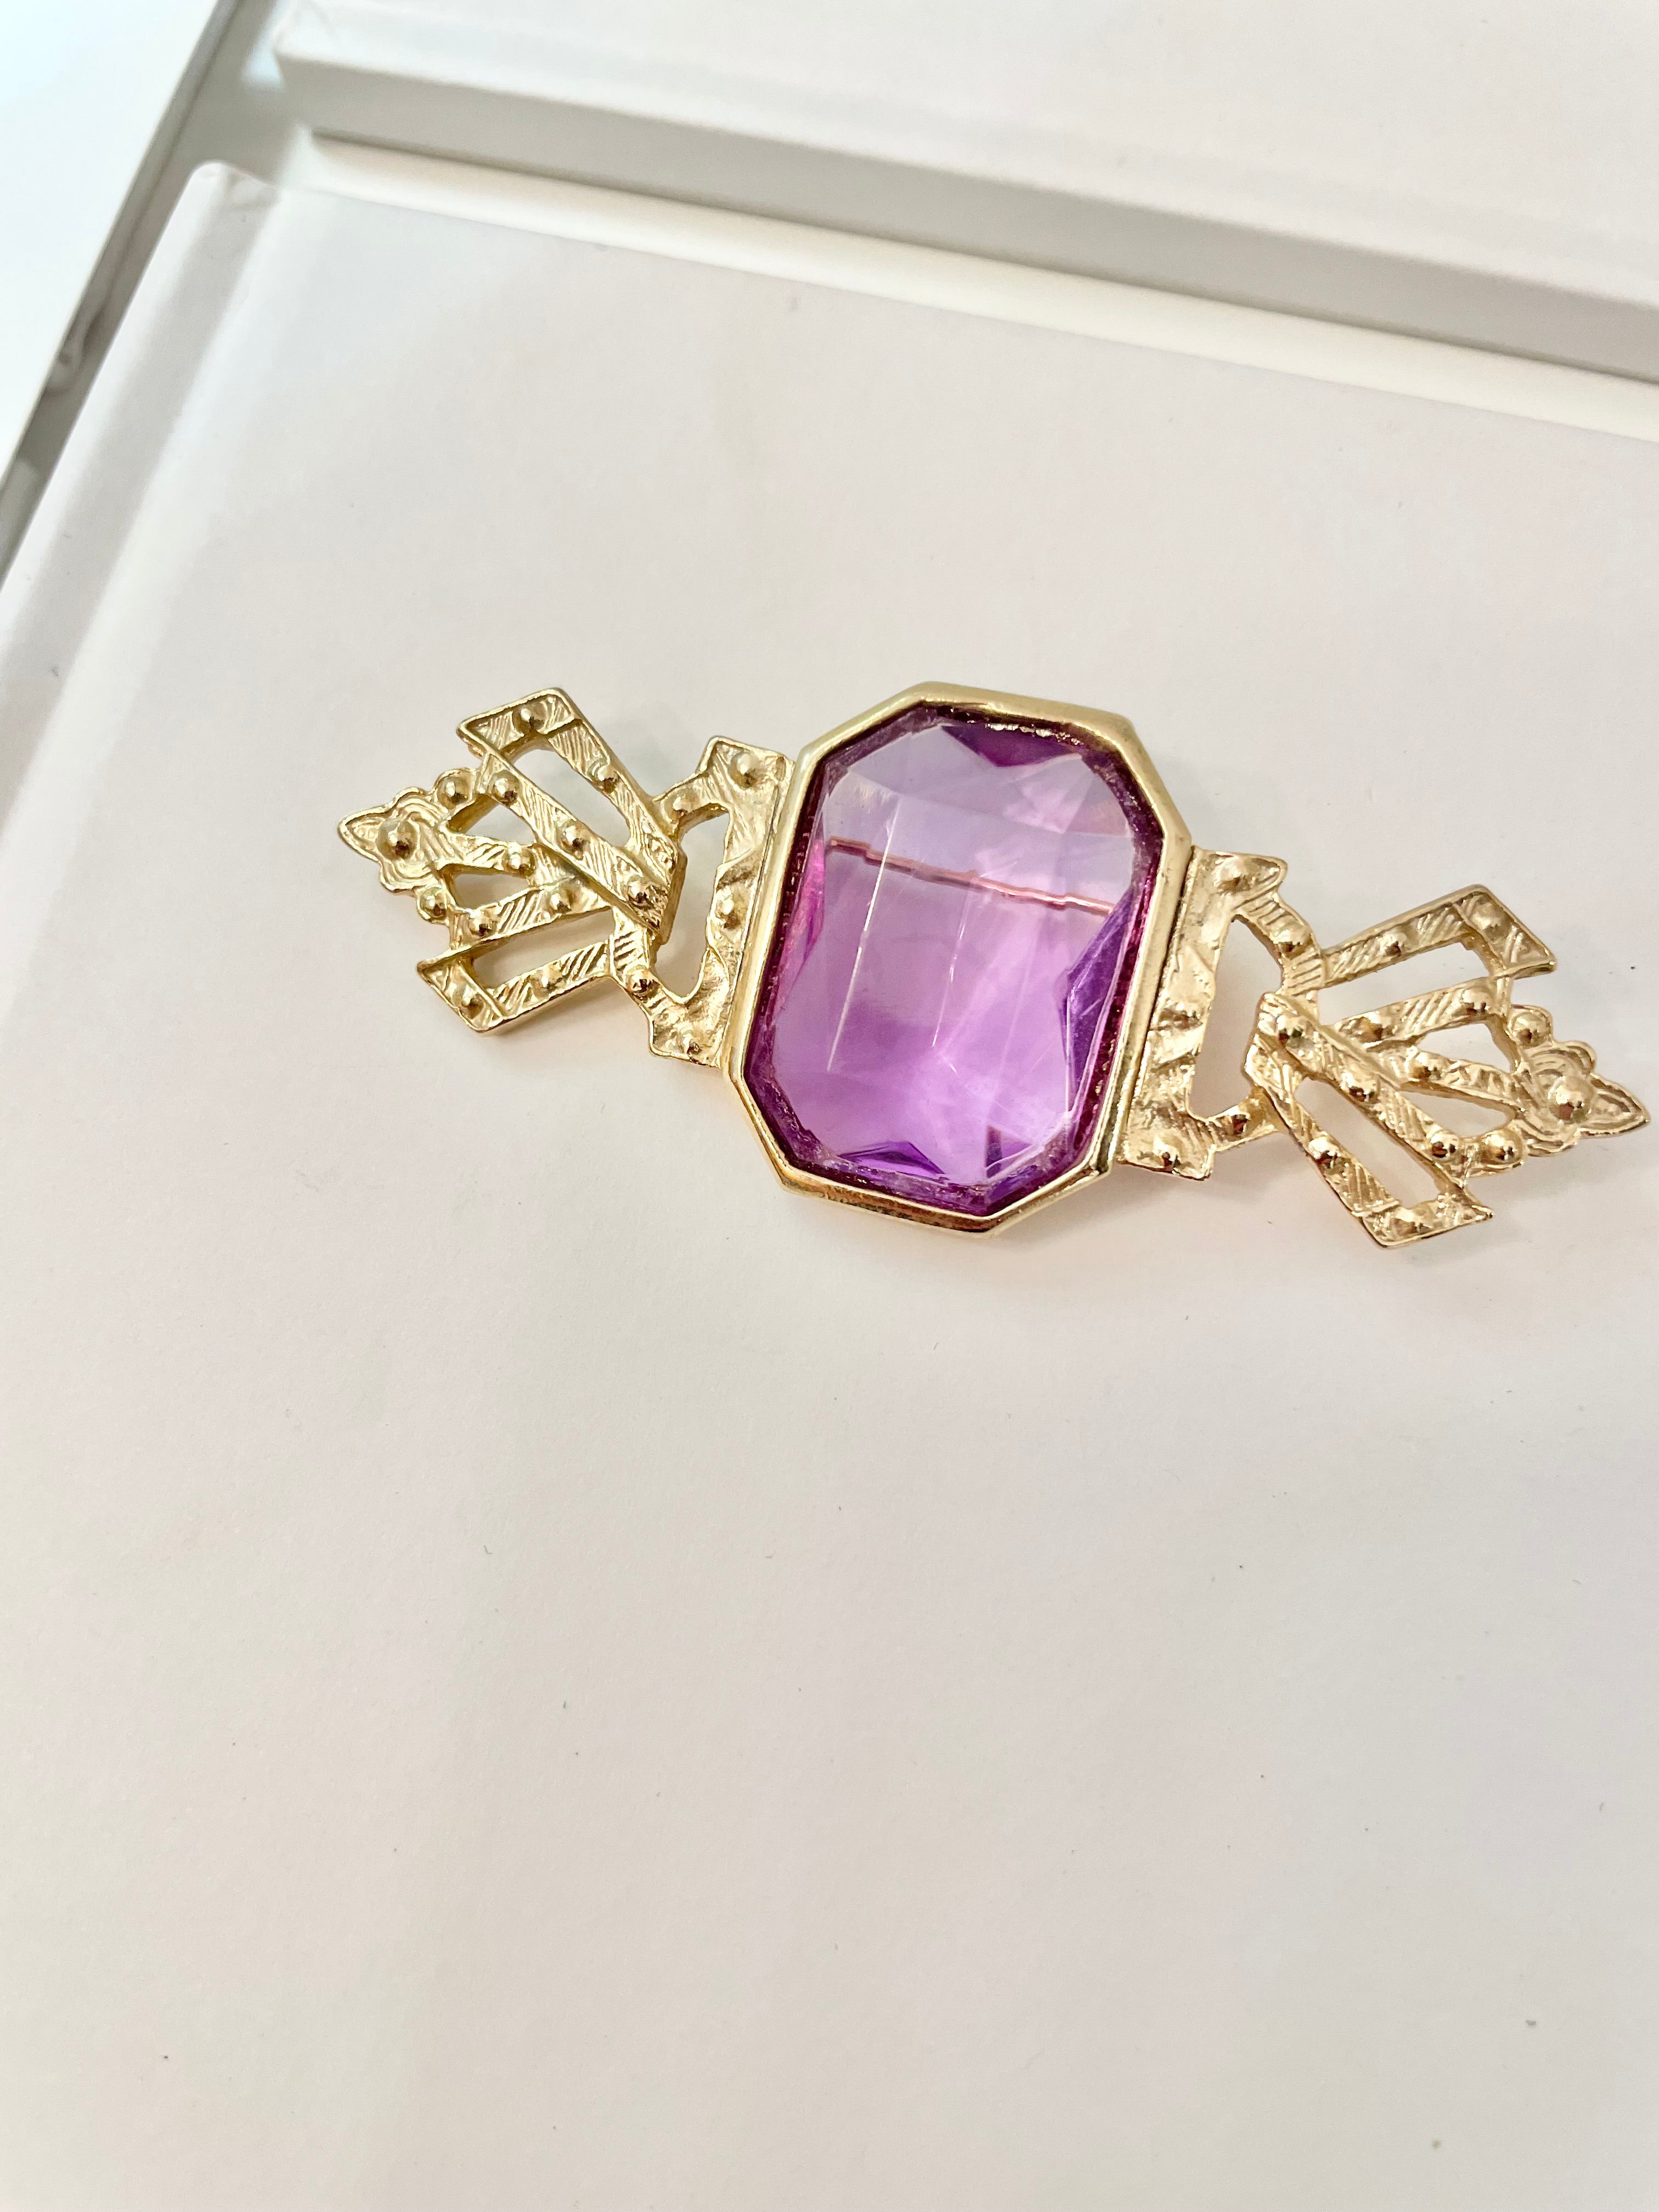 A truly beautiful 1980's brooch... so divine, and heavenly color!